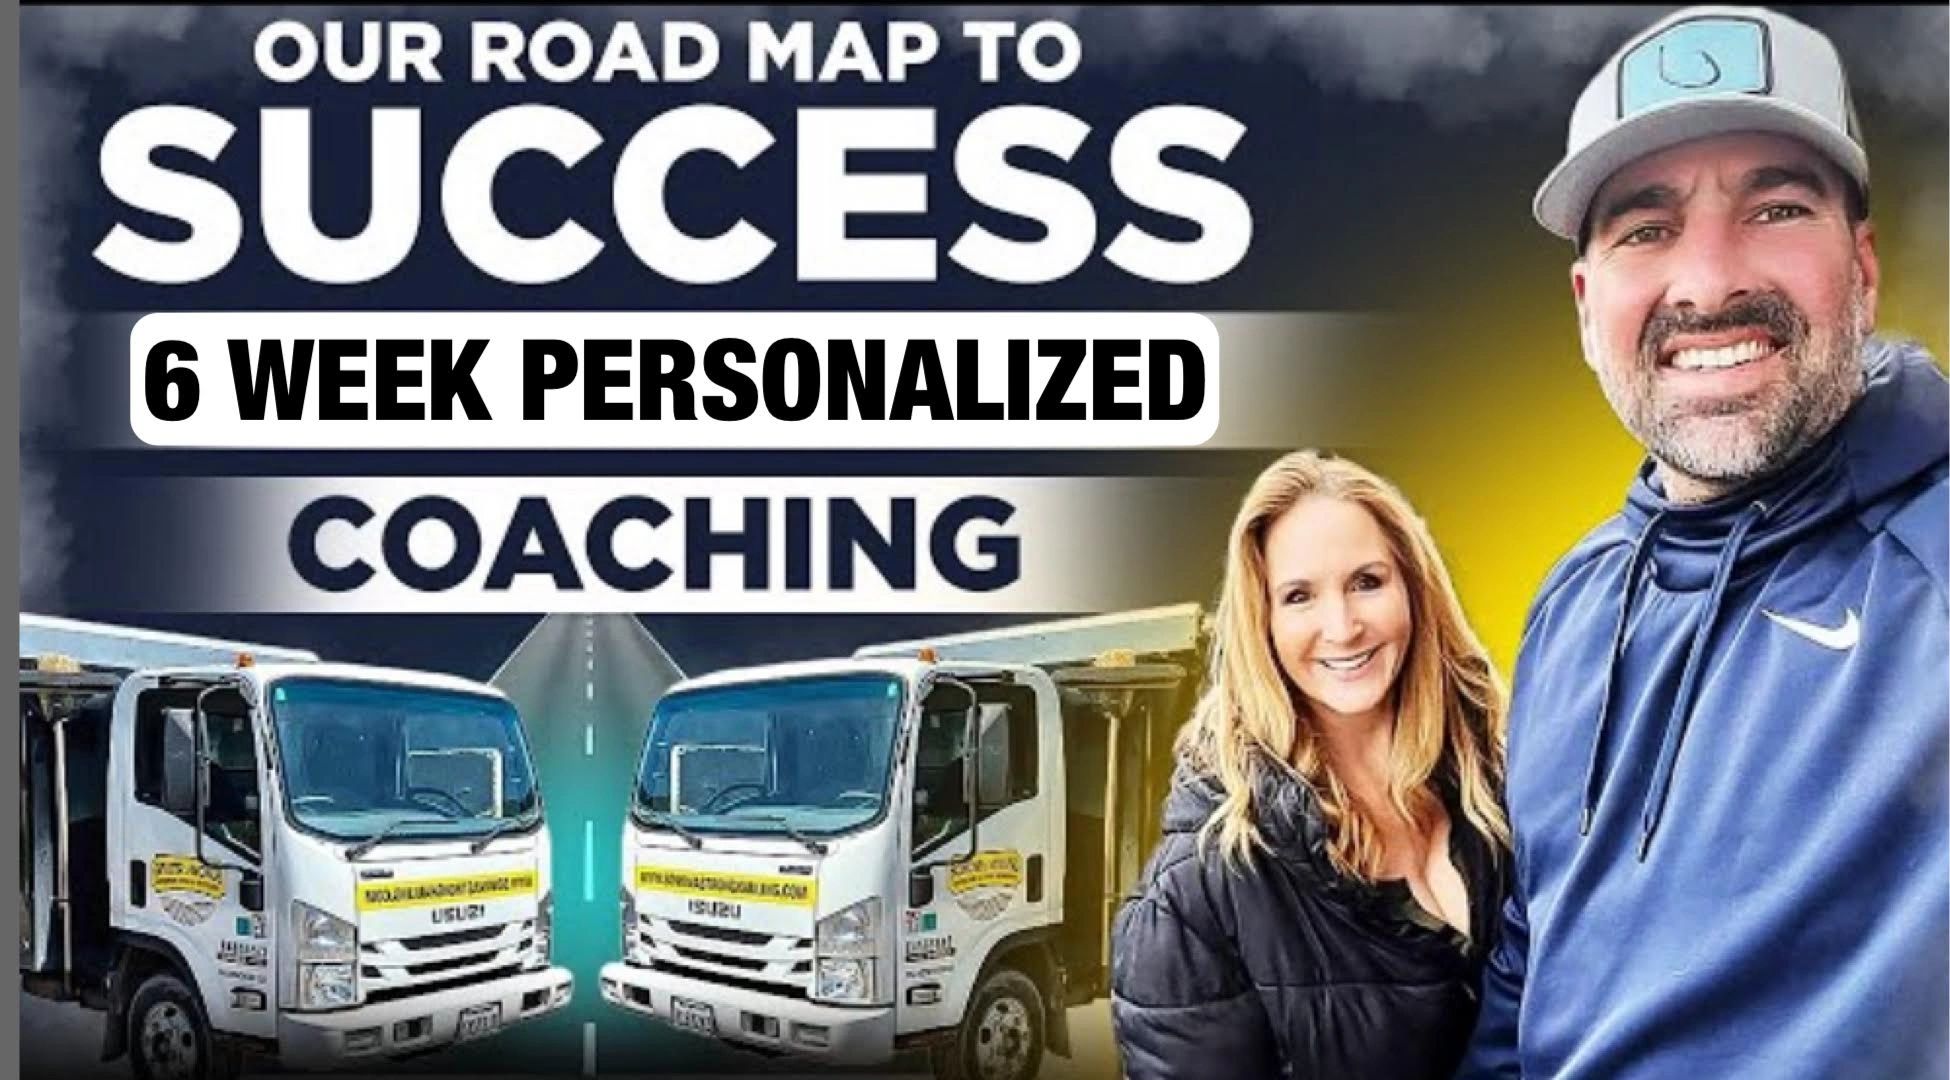 Junk removal coaching and education
learn how to run a business
sonoma strong hauling mentors
